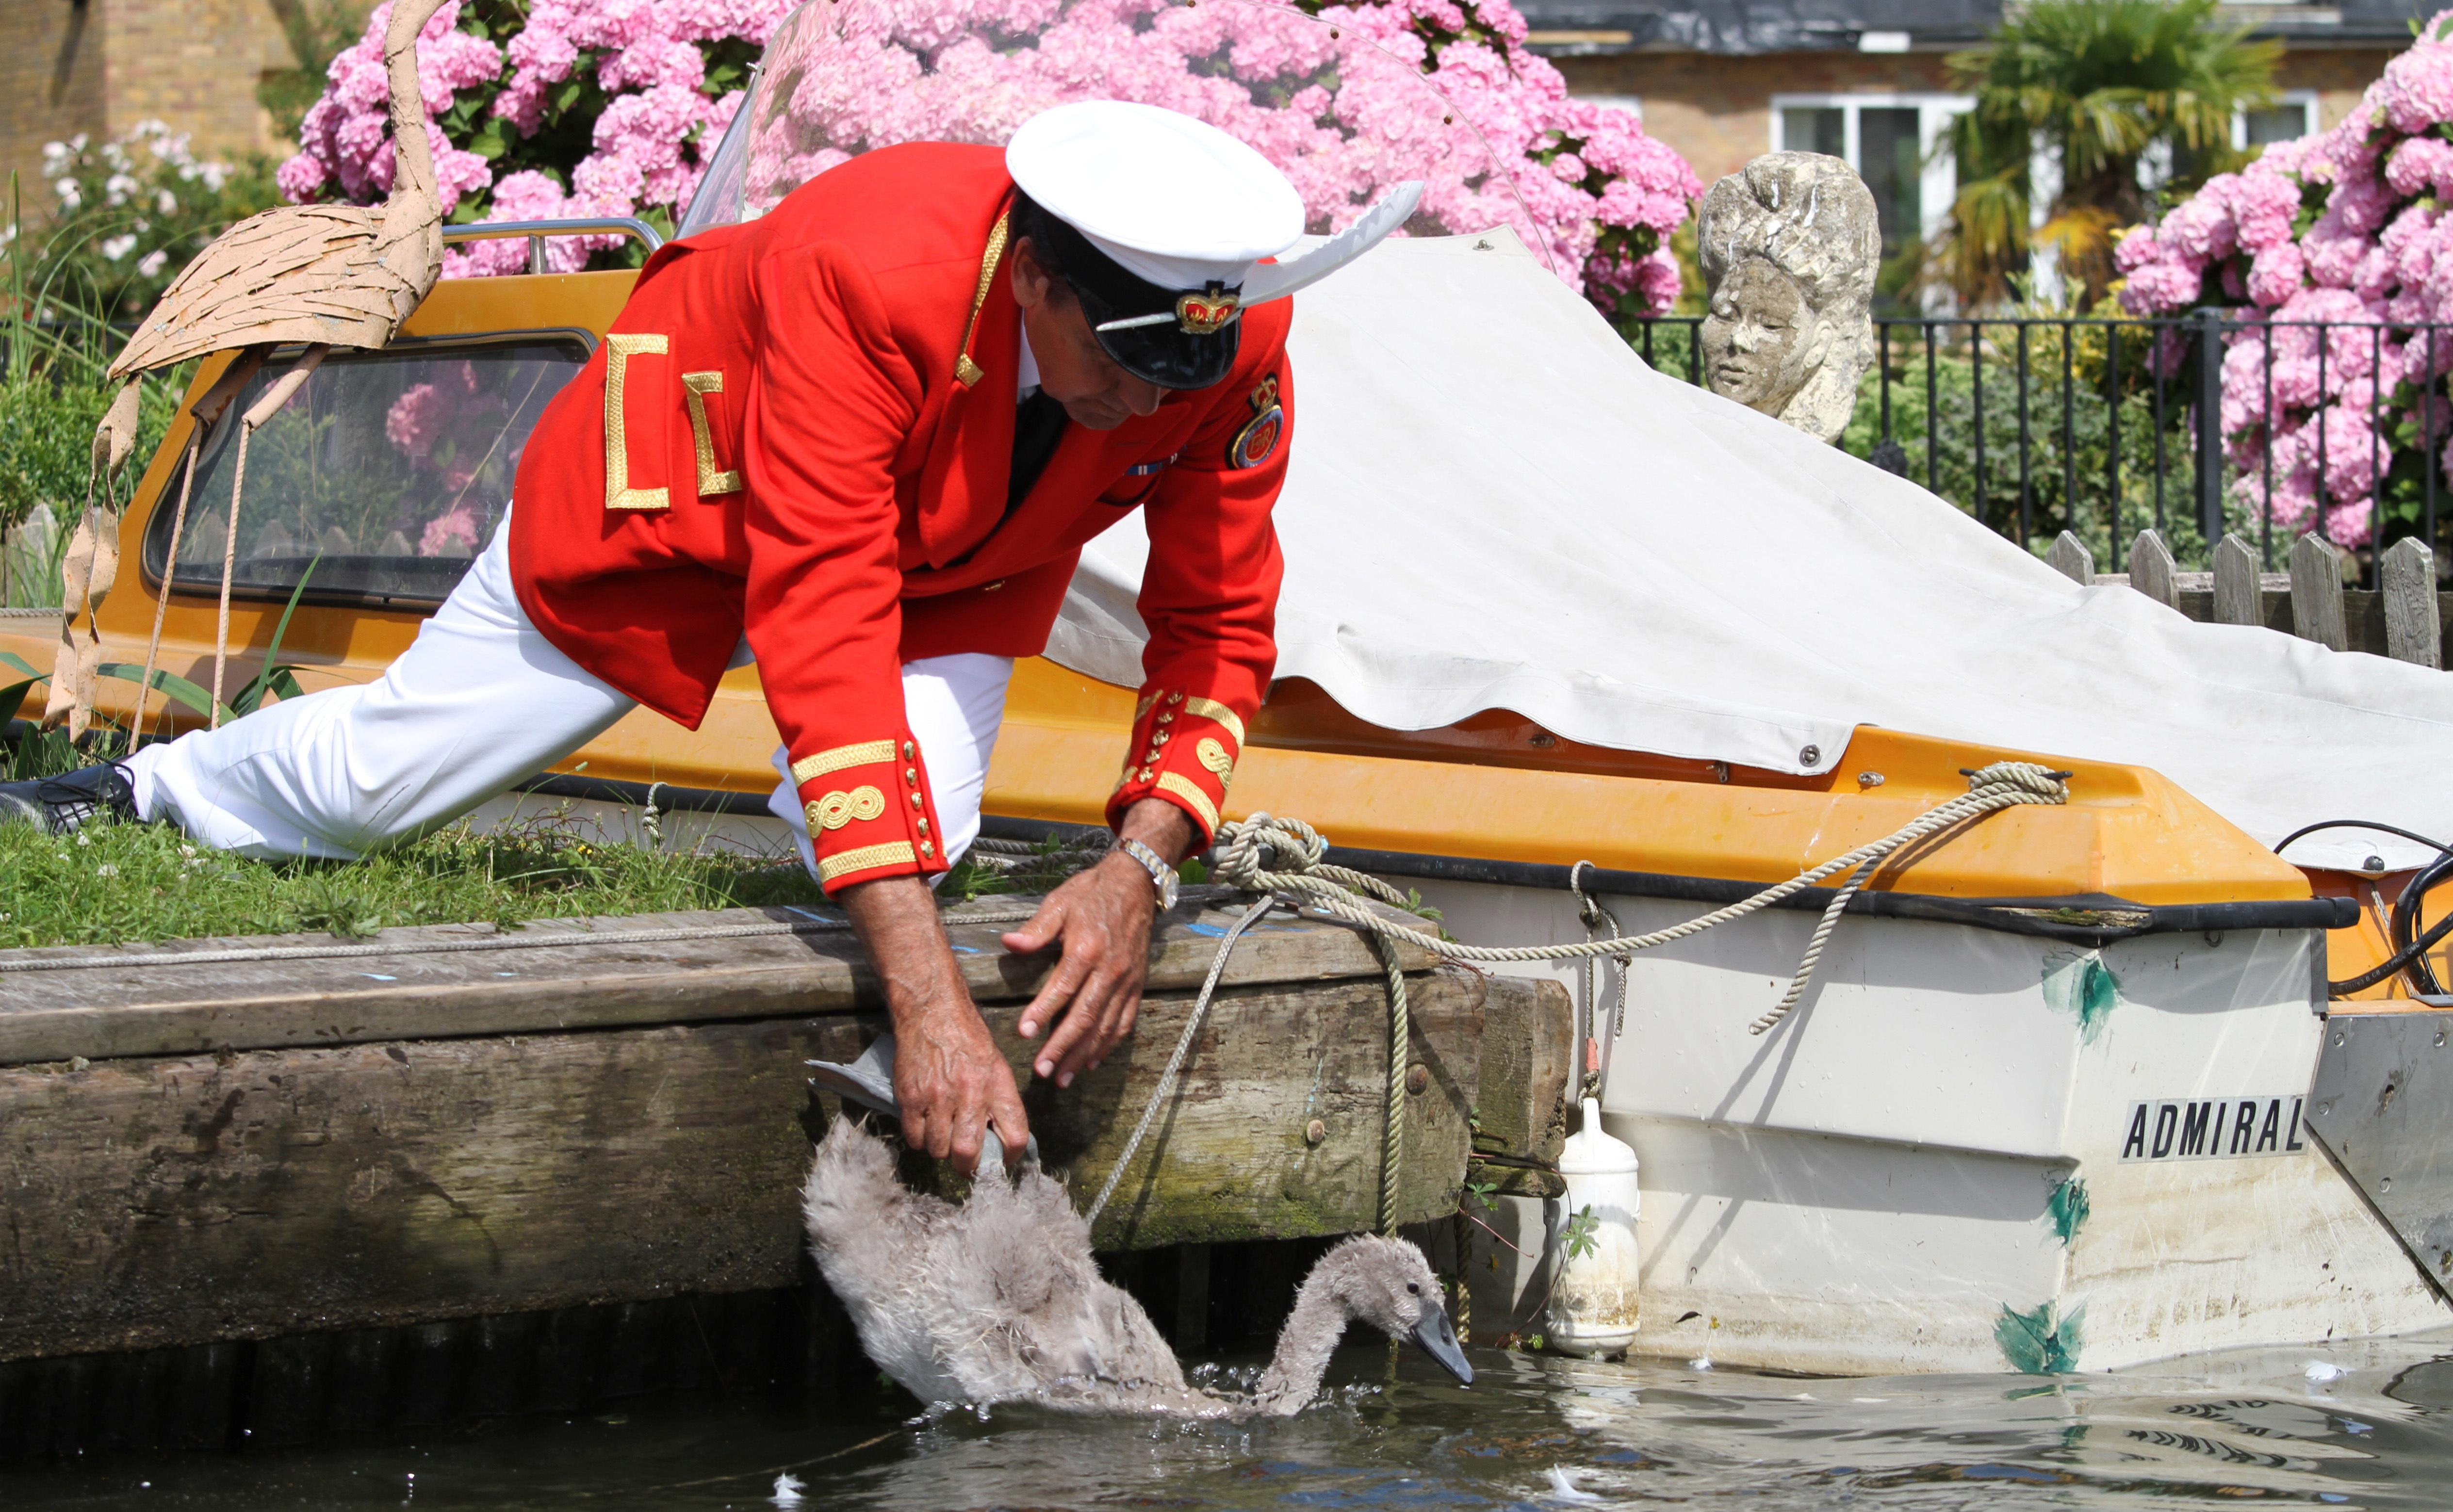 The Queen’s Swan Marker David Barker releases a cygnet back into the River Thames, in Staines on Thames, England, Monday July 18, 2016, during the annual count of the Queen's swans on the river Thames. The queen is the traditional owner of unmarked mute swans and royal tradition requires they be counted each year. (AP Photo/Leonora Beck)